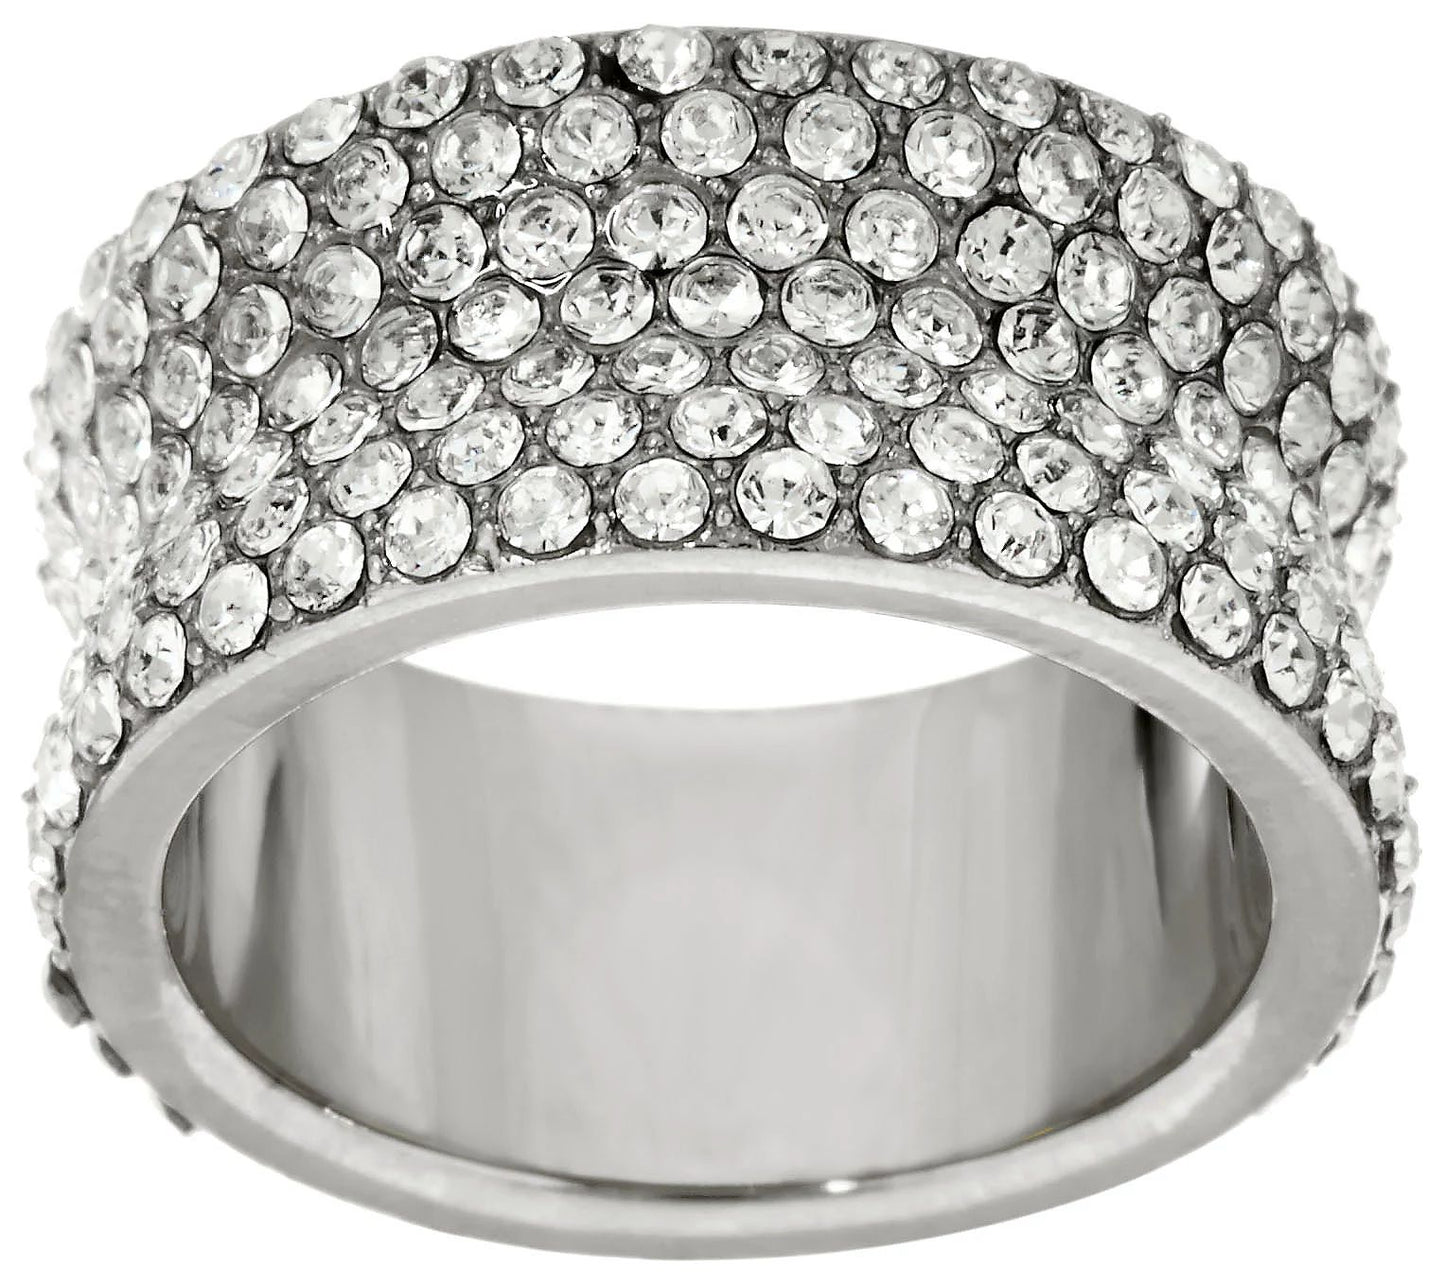 Stainless Steel Concave Pave Crystal Eternity Band Ring. Size.6